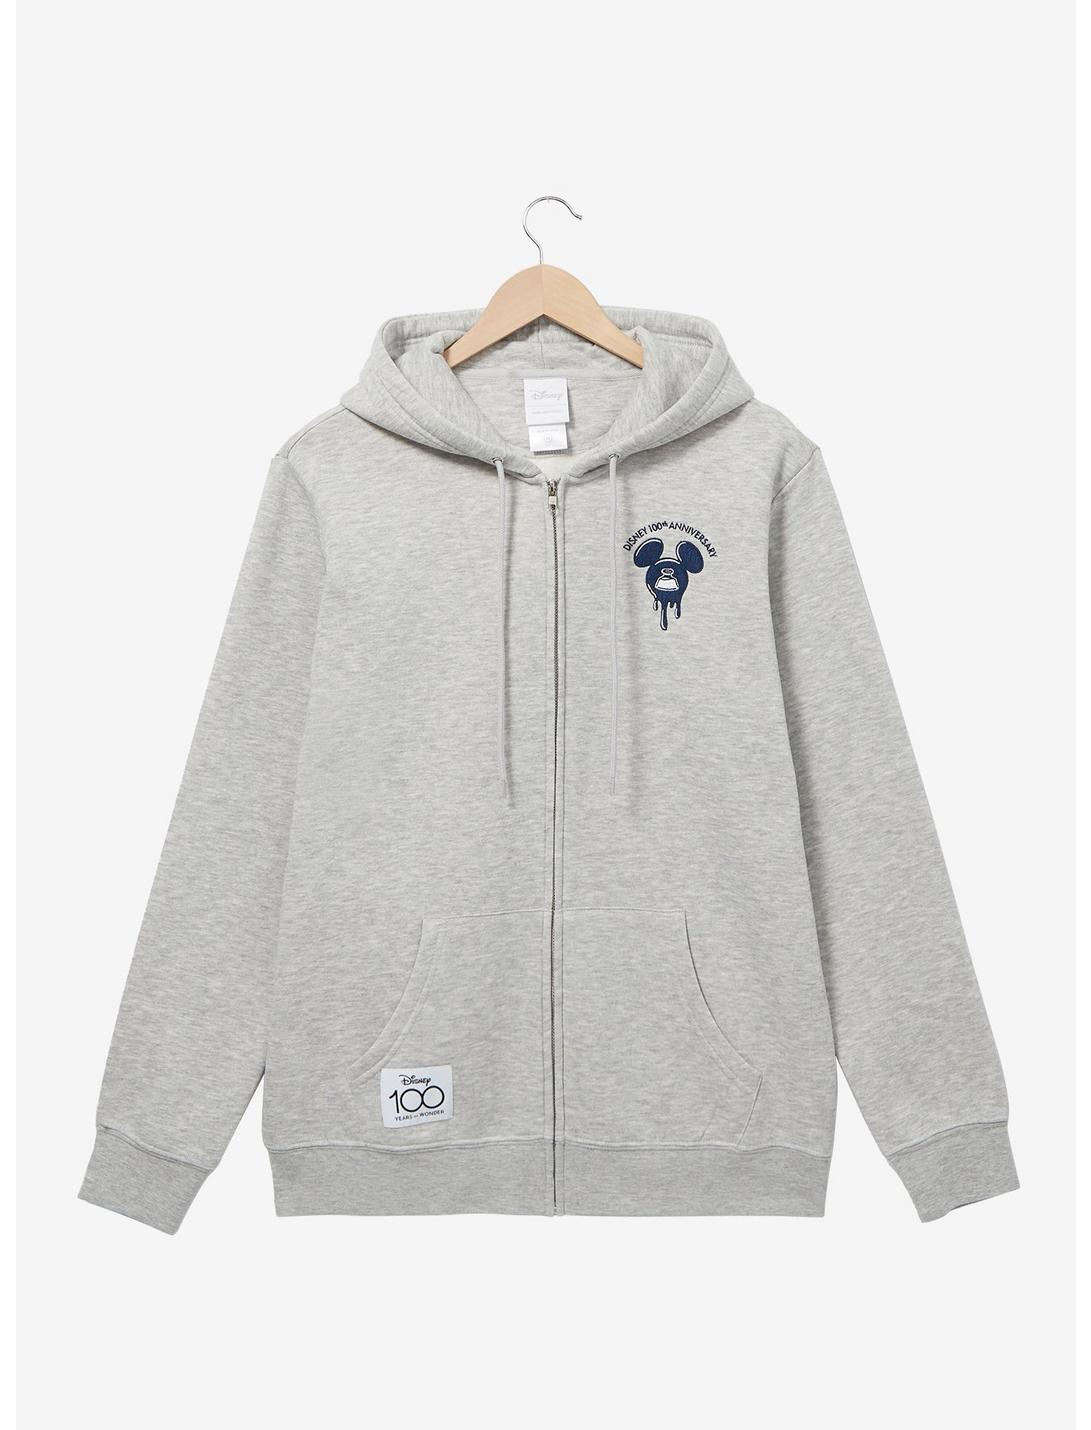 Disney 100 Mickey Mouse Zippered Hoodie - BoxLunch Exclusive, GREY HEATHER, hi-res